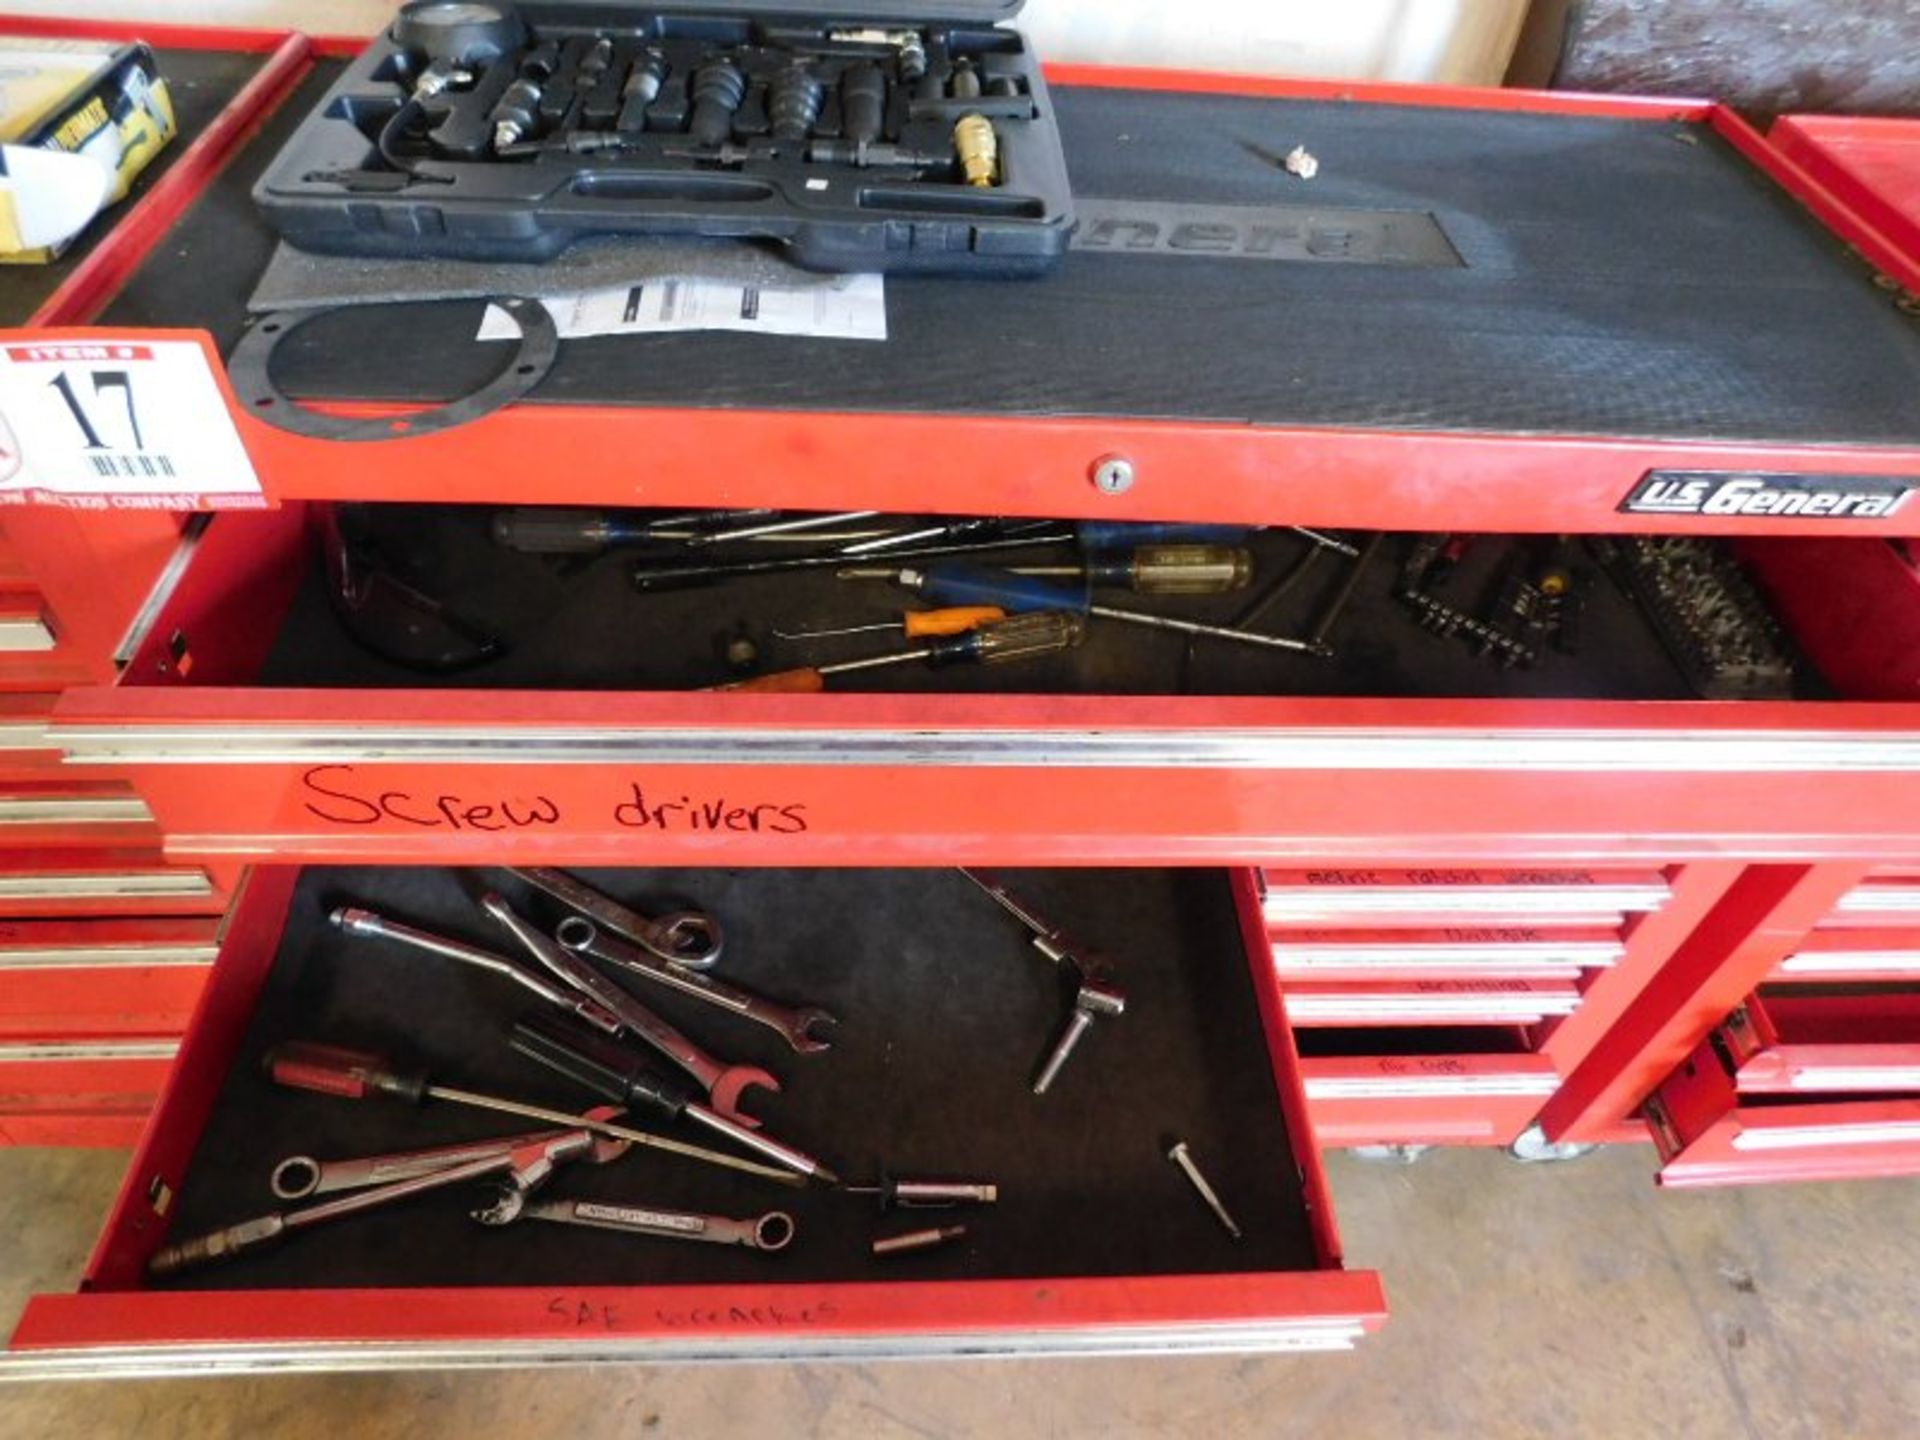 US General 13-Drawer Tool Box on Casters, W/7-Drawer Tool Box, w/Contents, Screwdrivers, Wrenches, - Image 2 of 2